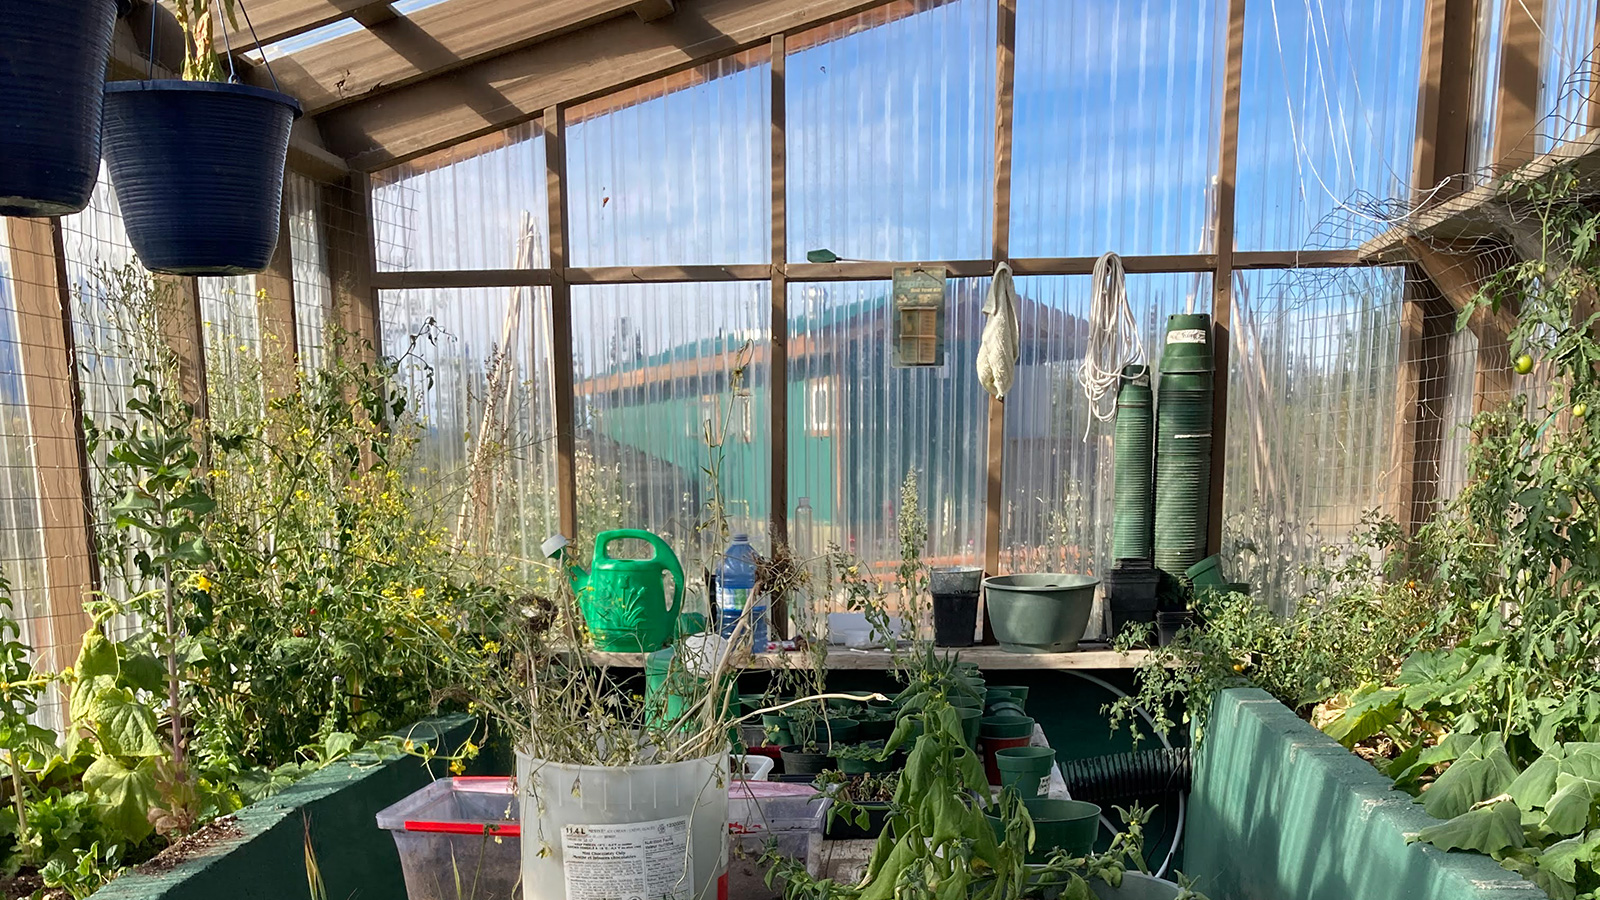 Inside the KLRS greenhouse